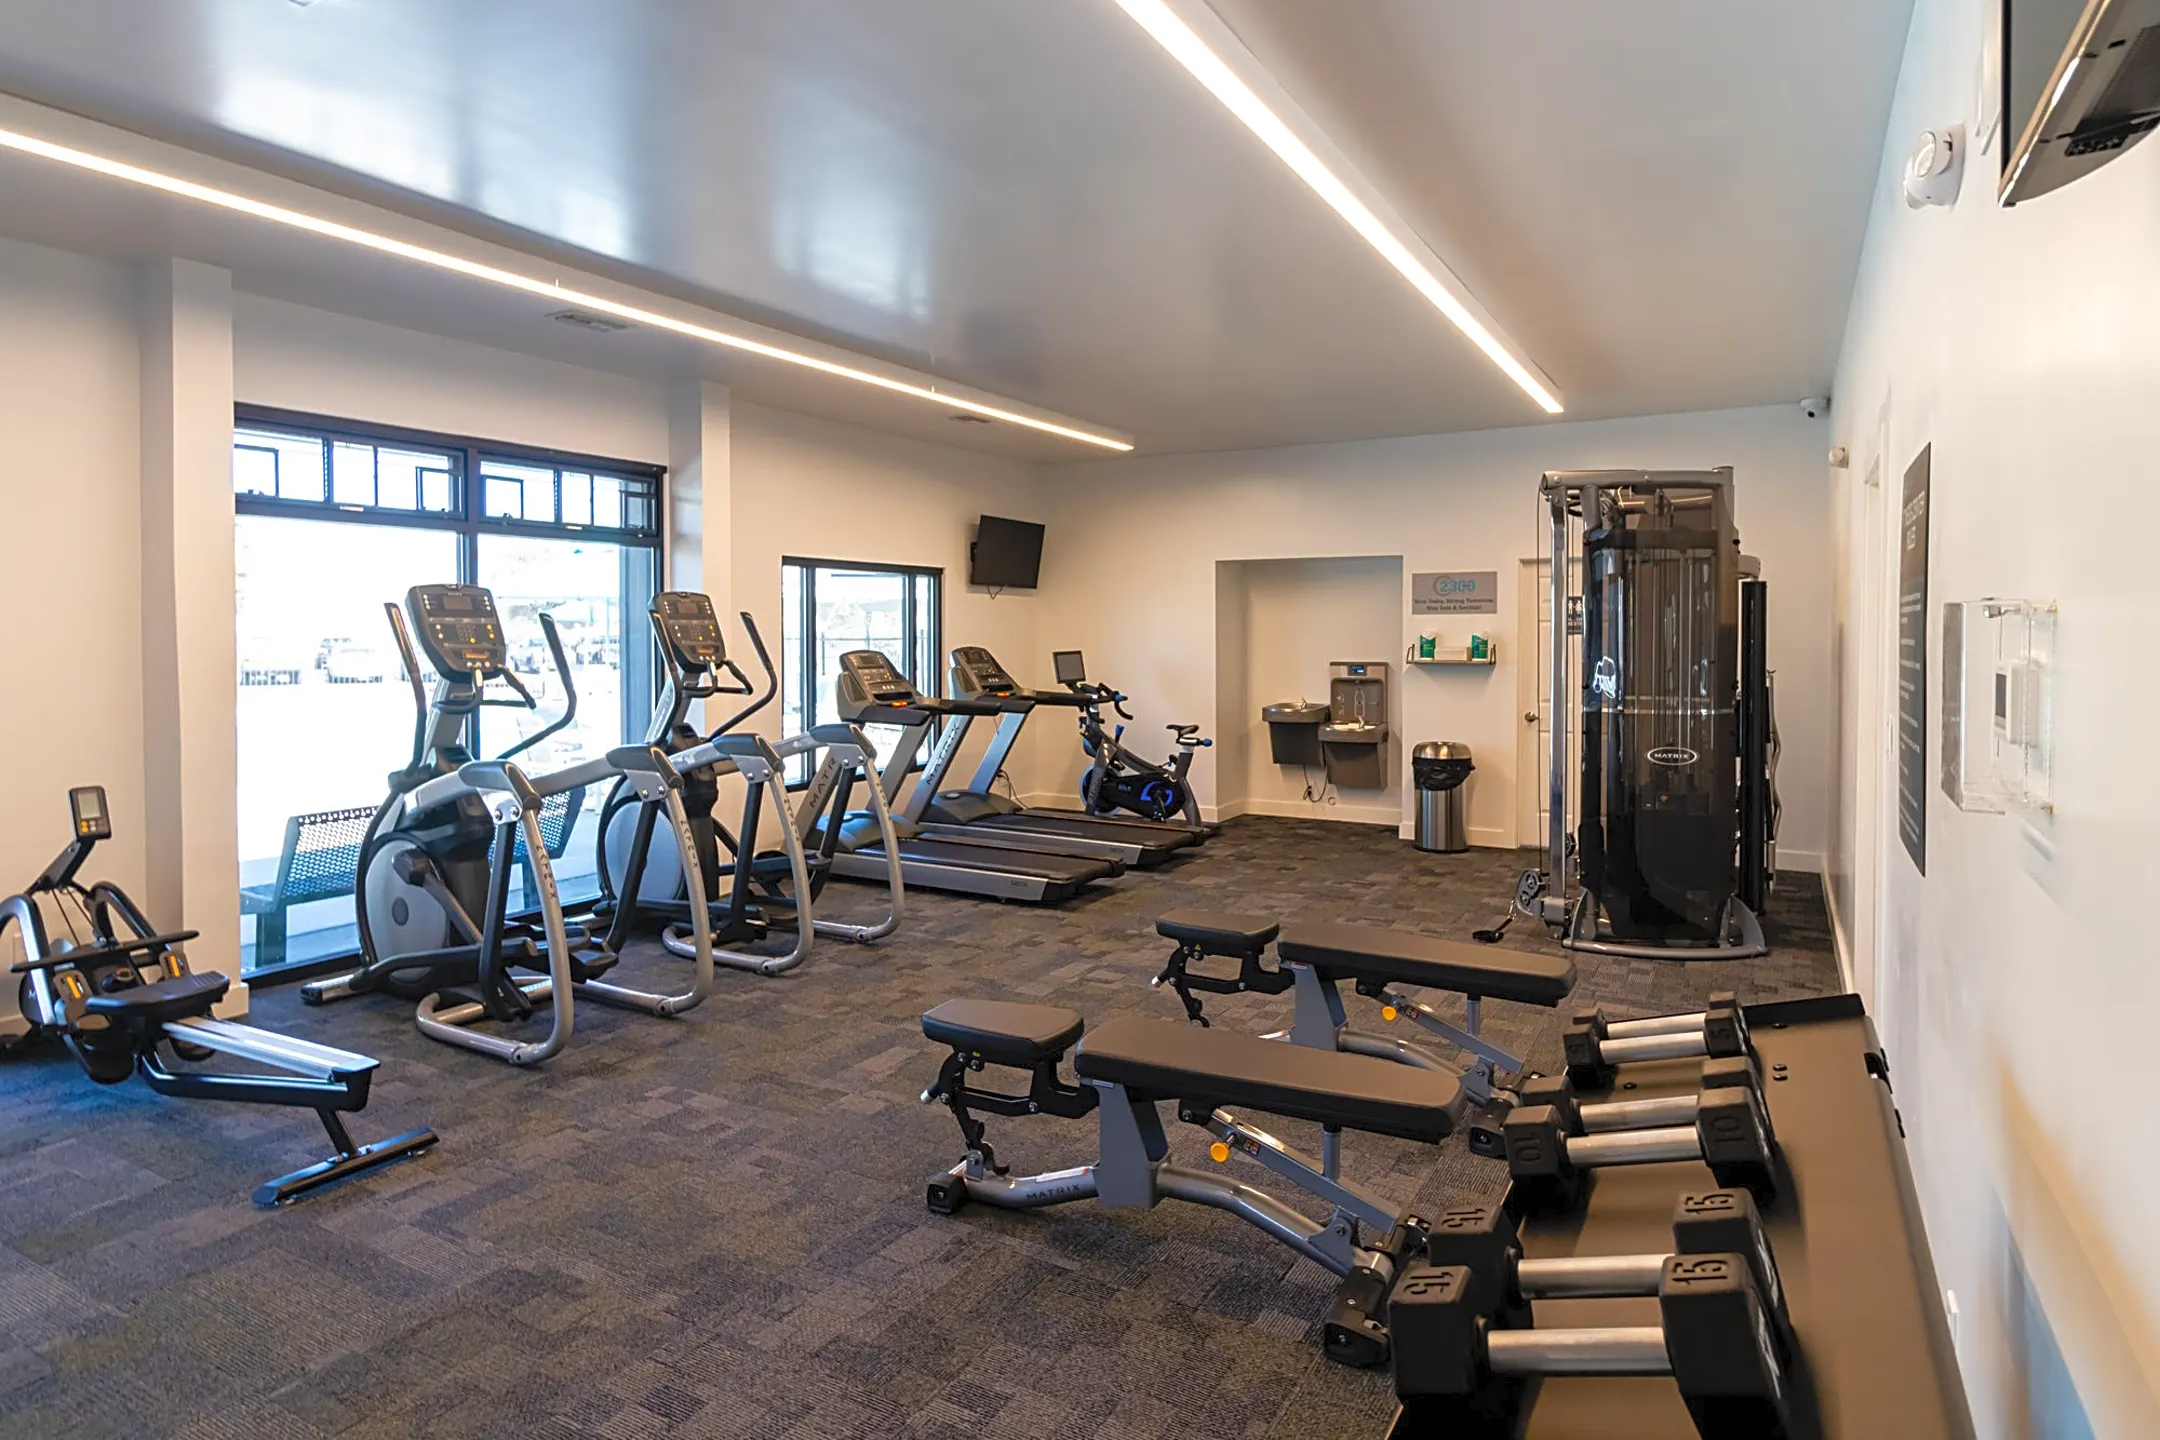 Fitness Weight Room - 2300 West Apartments - Reno, NV